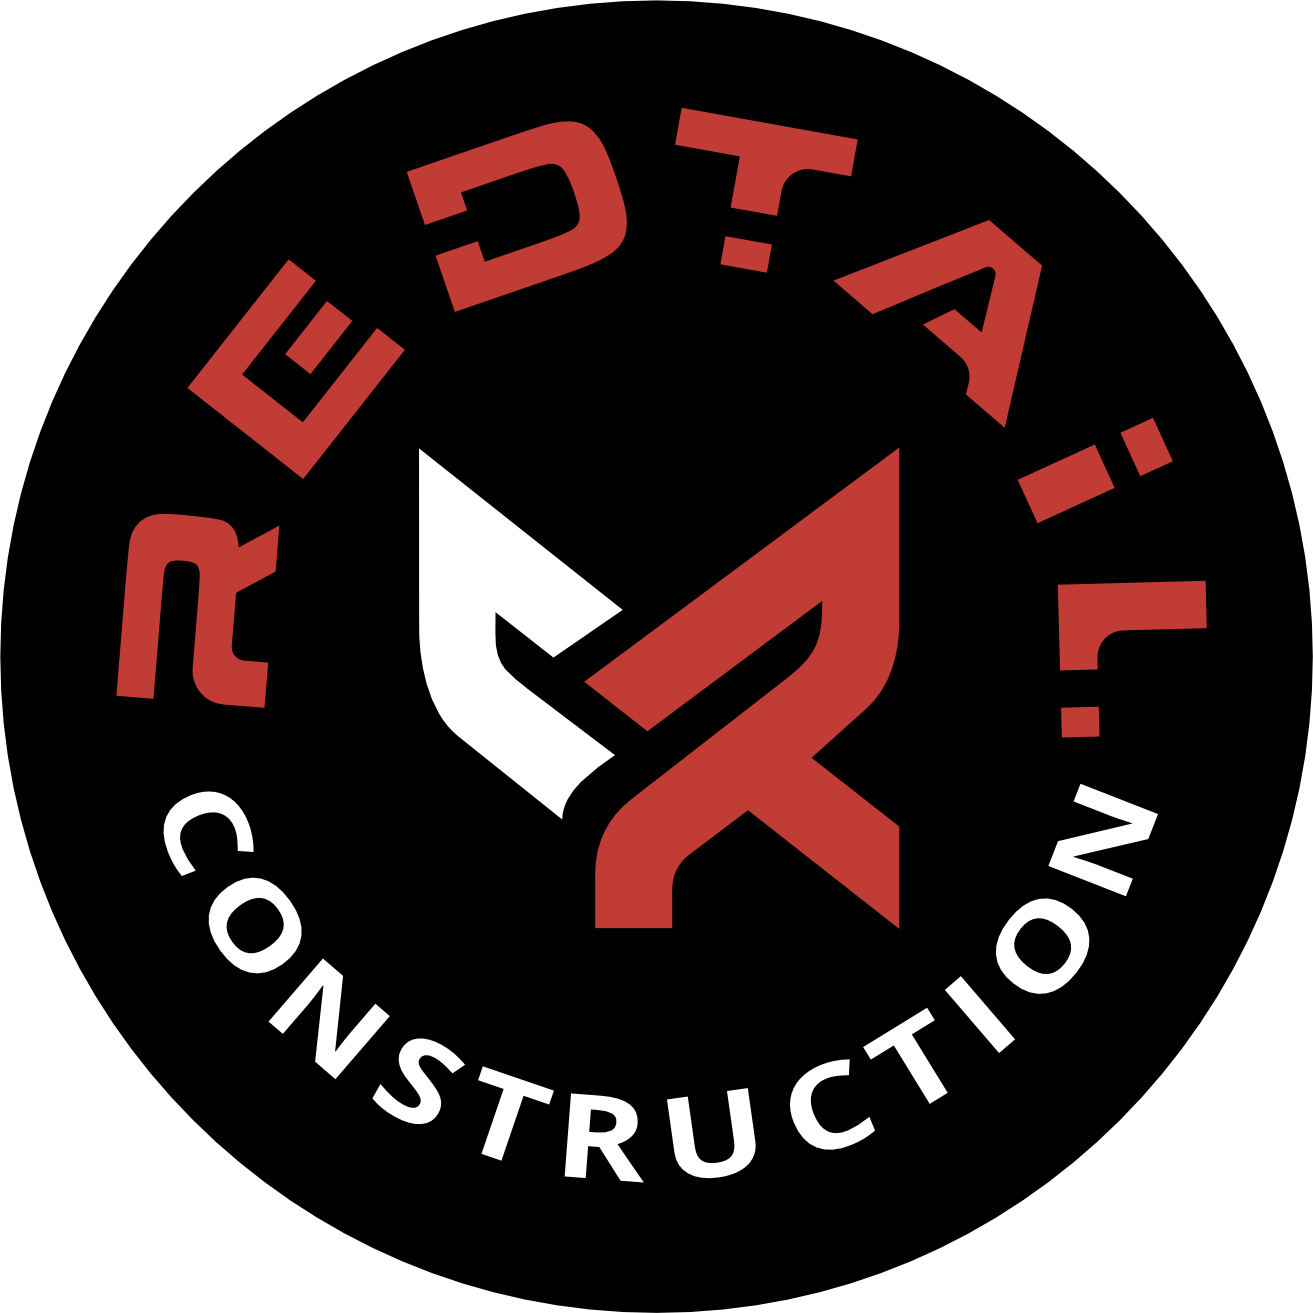 Redtail Construction Logo. Black Circle with the word Redtail in red color curved on top with the white and red symbol in the middle and the word construction in white letter curving up at the bottom. Outdoor spaces, concrete services, hardscape services, concrete patios, fire pits, outdoor kitchens